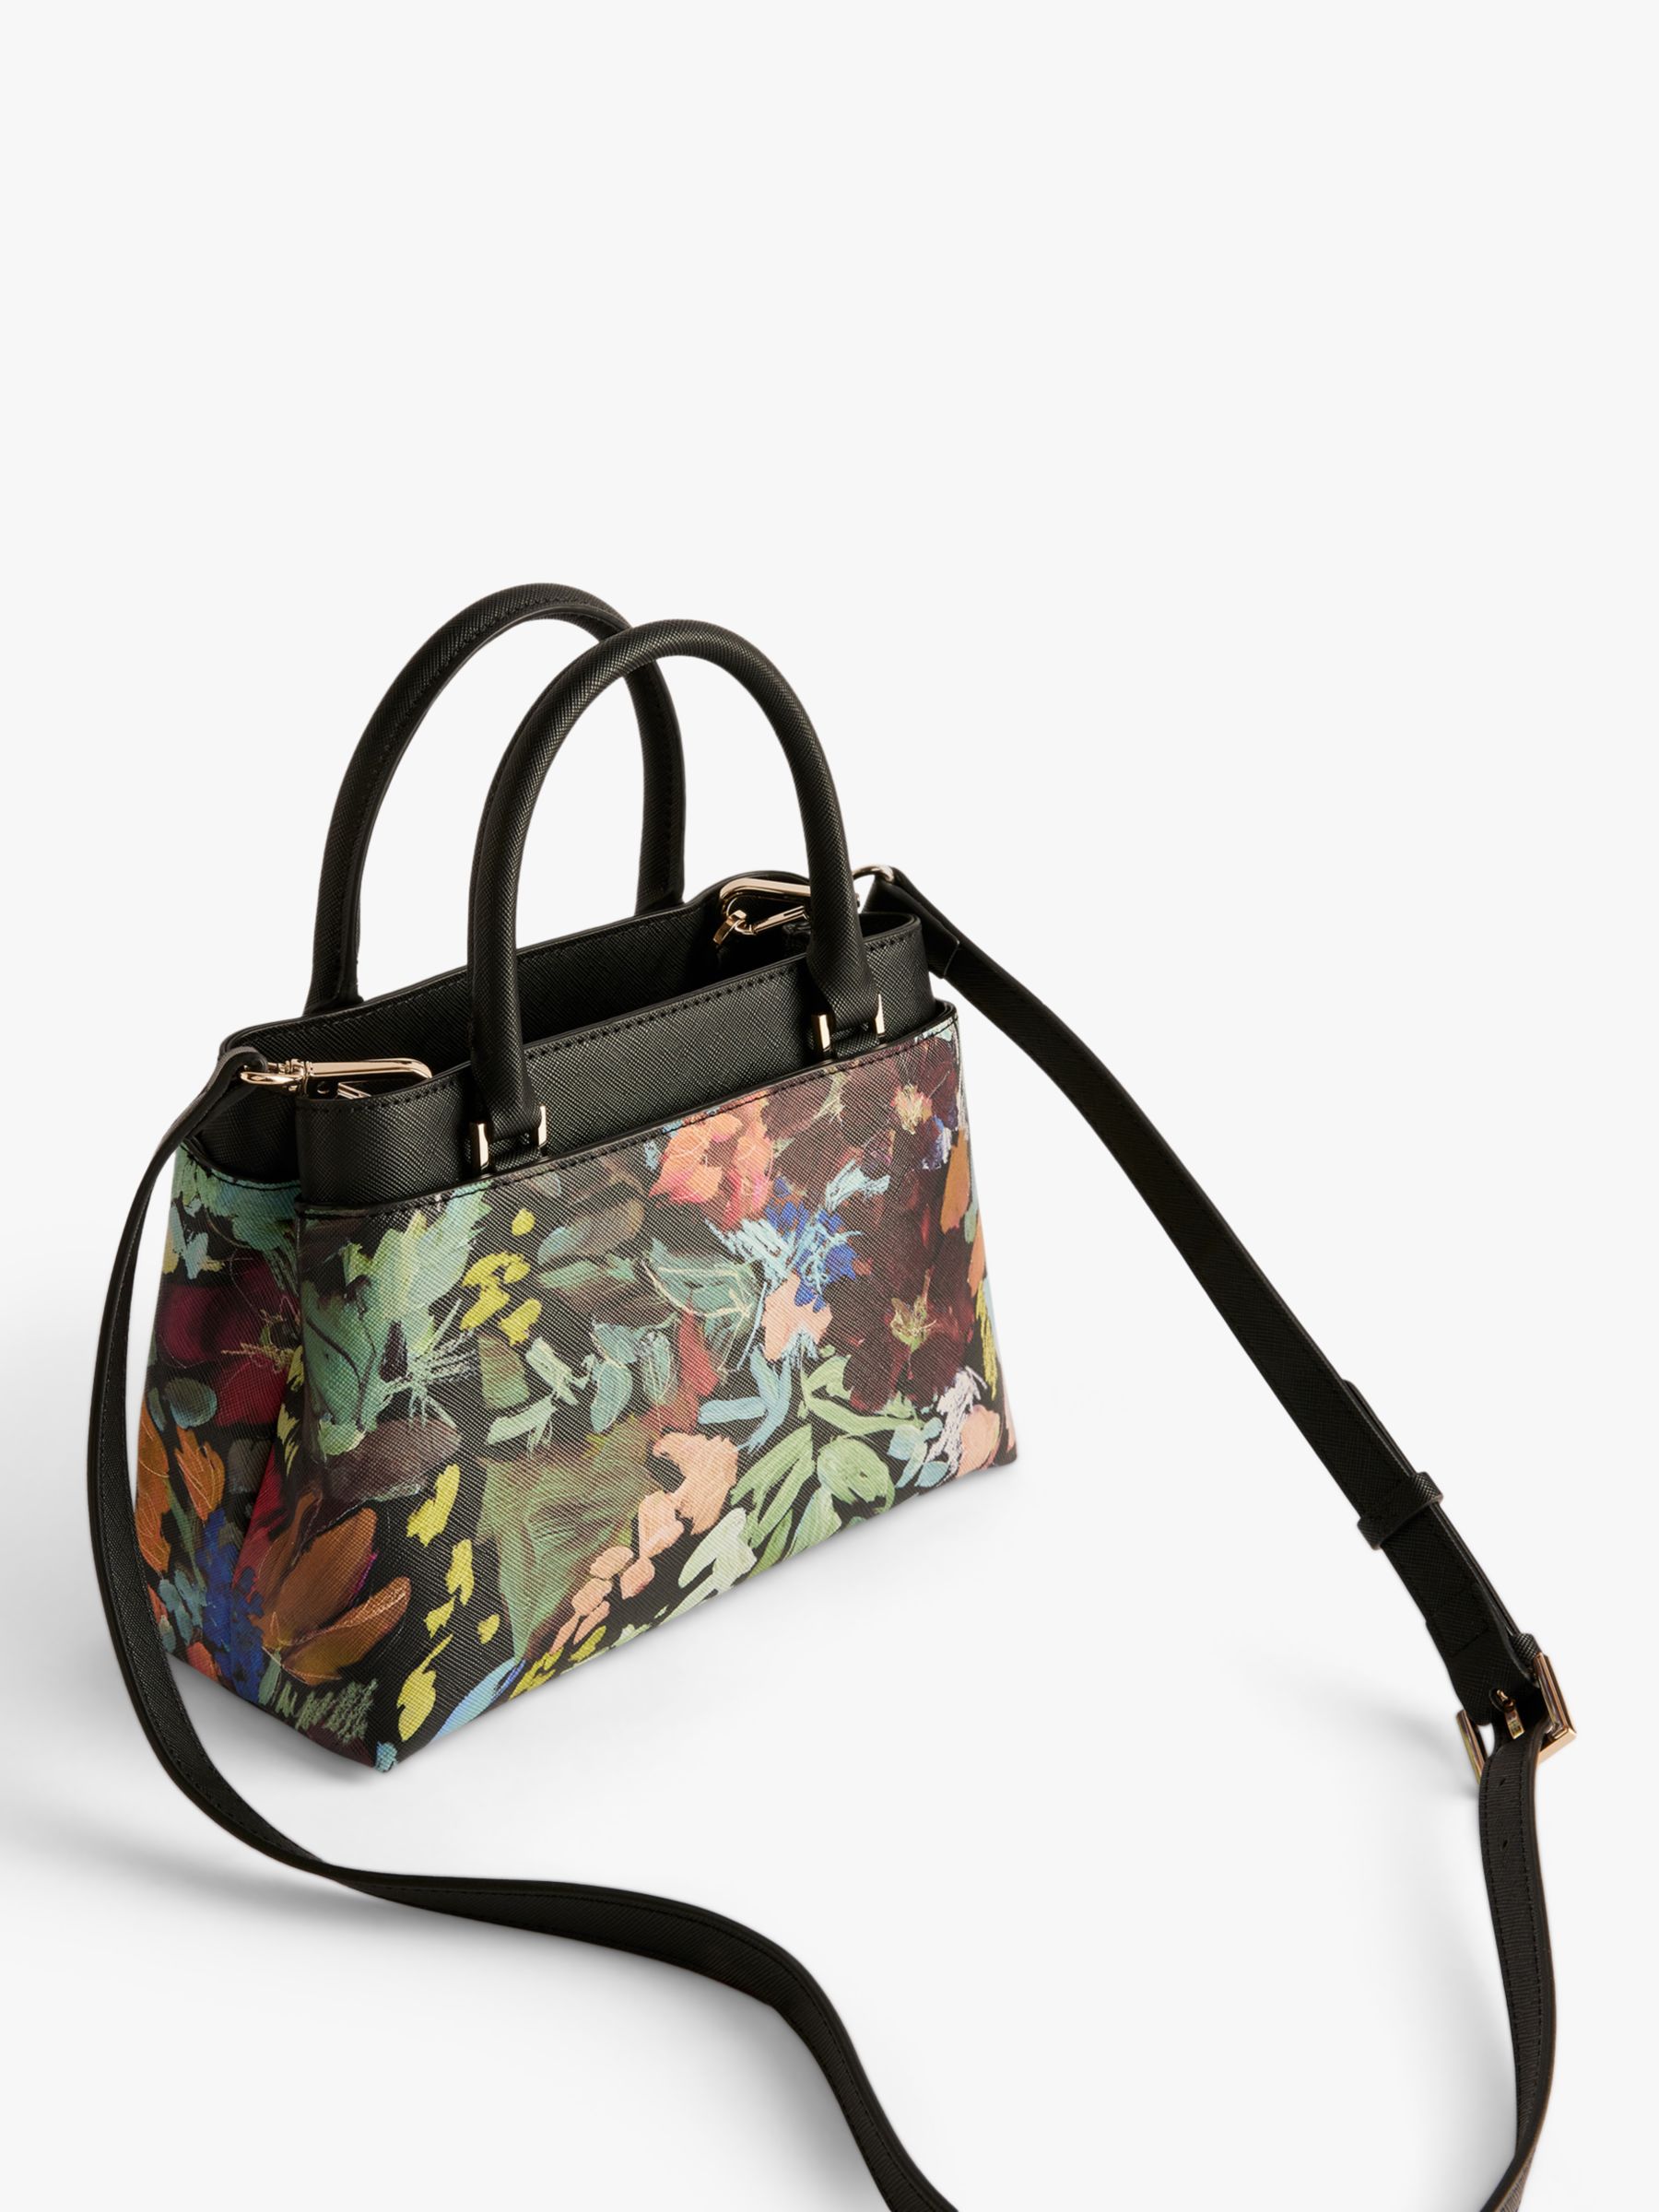 Ted Baker Beaticn Painted Meadow Mini Top Handle Bag, Black/Multi, One Size